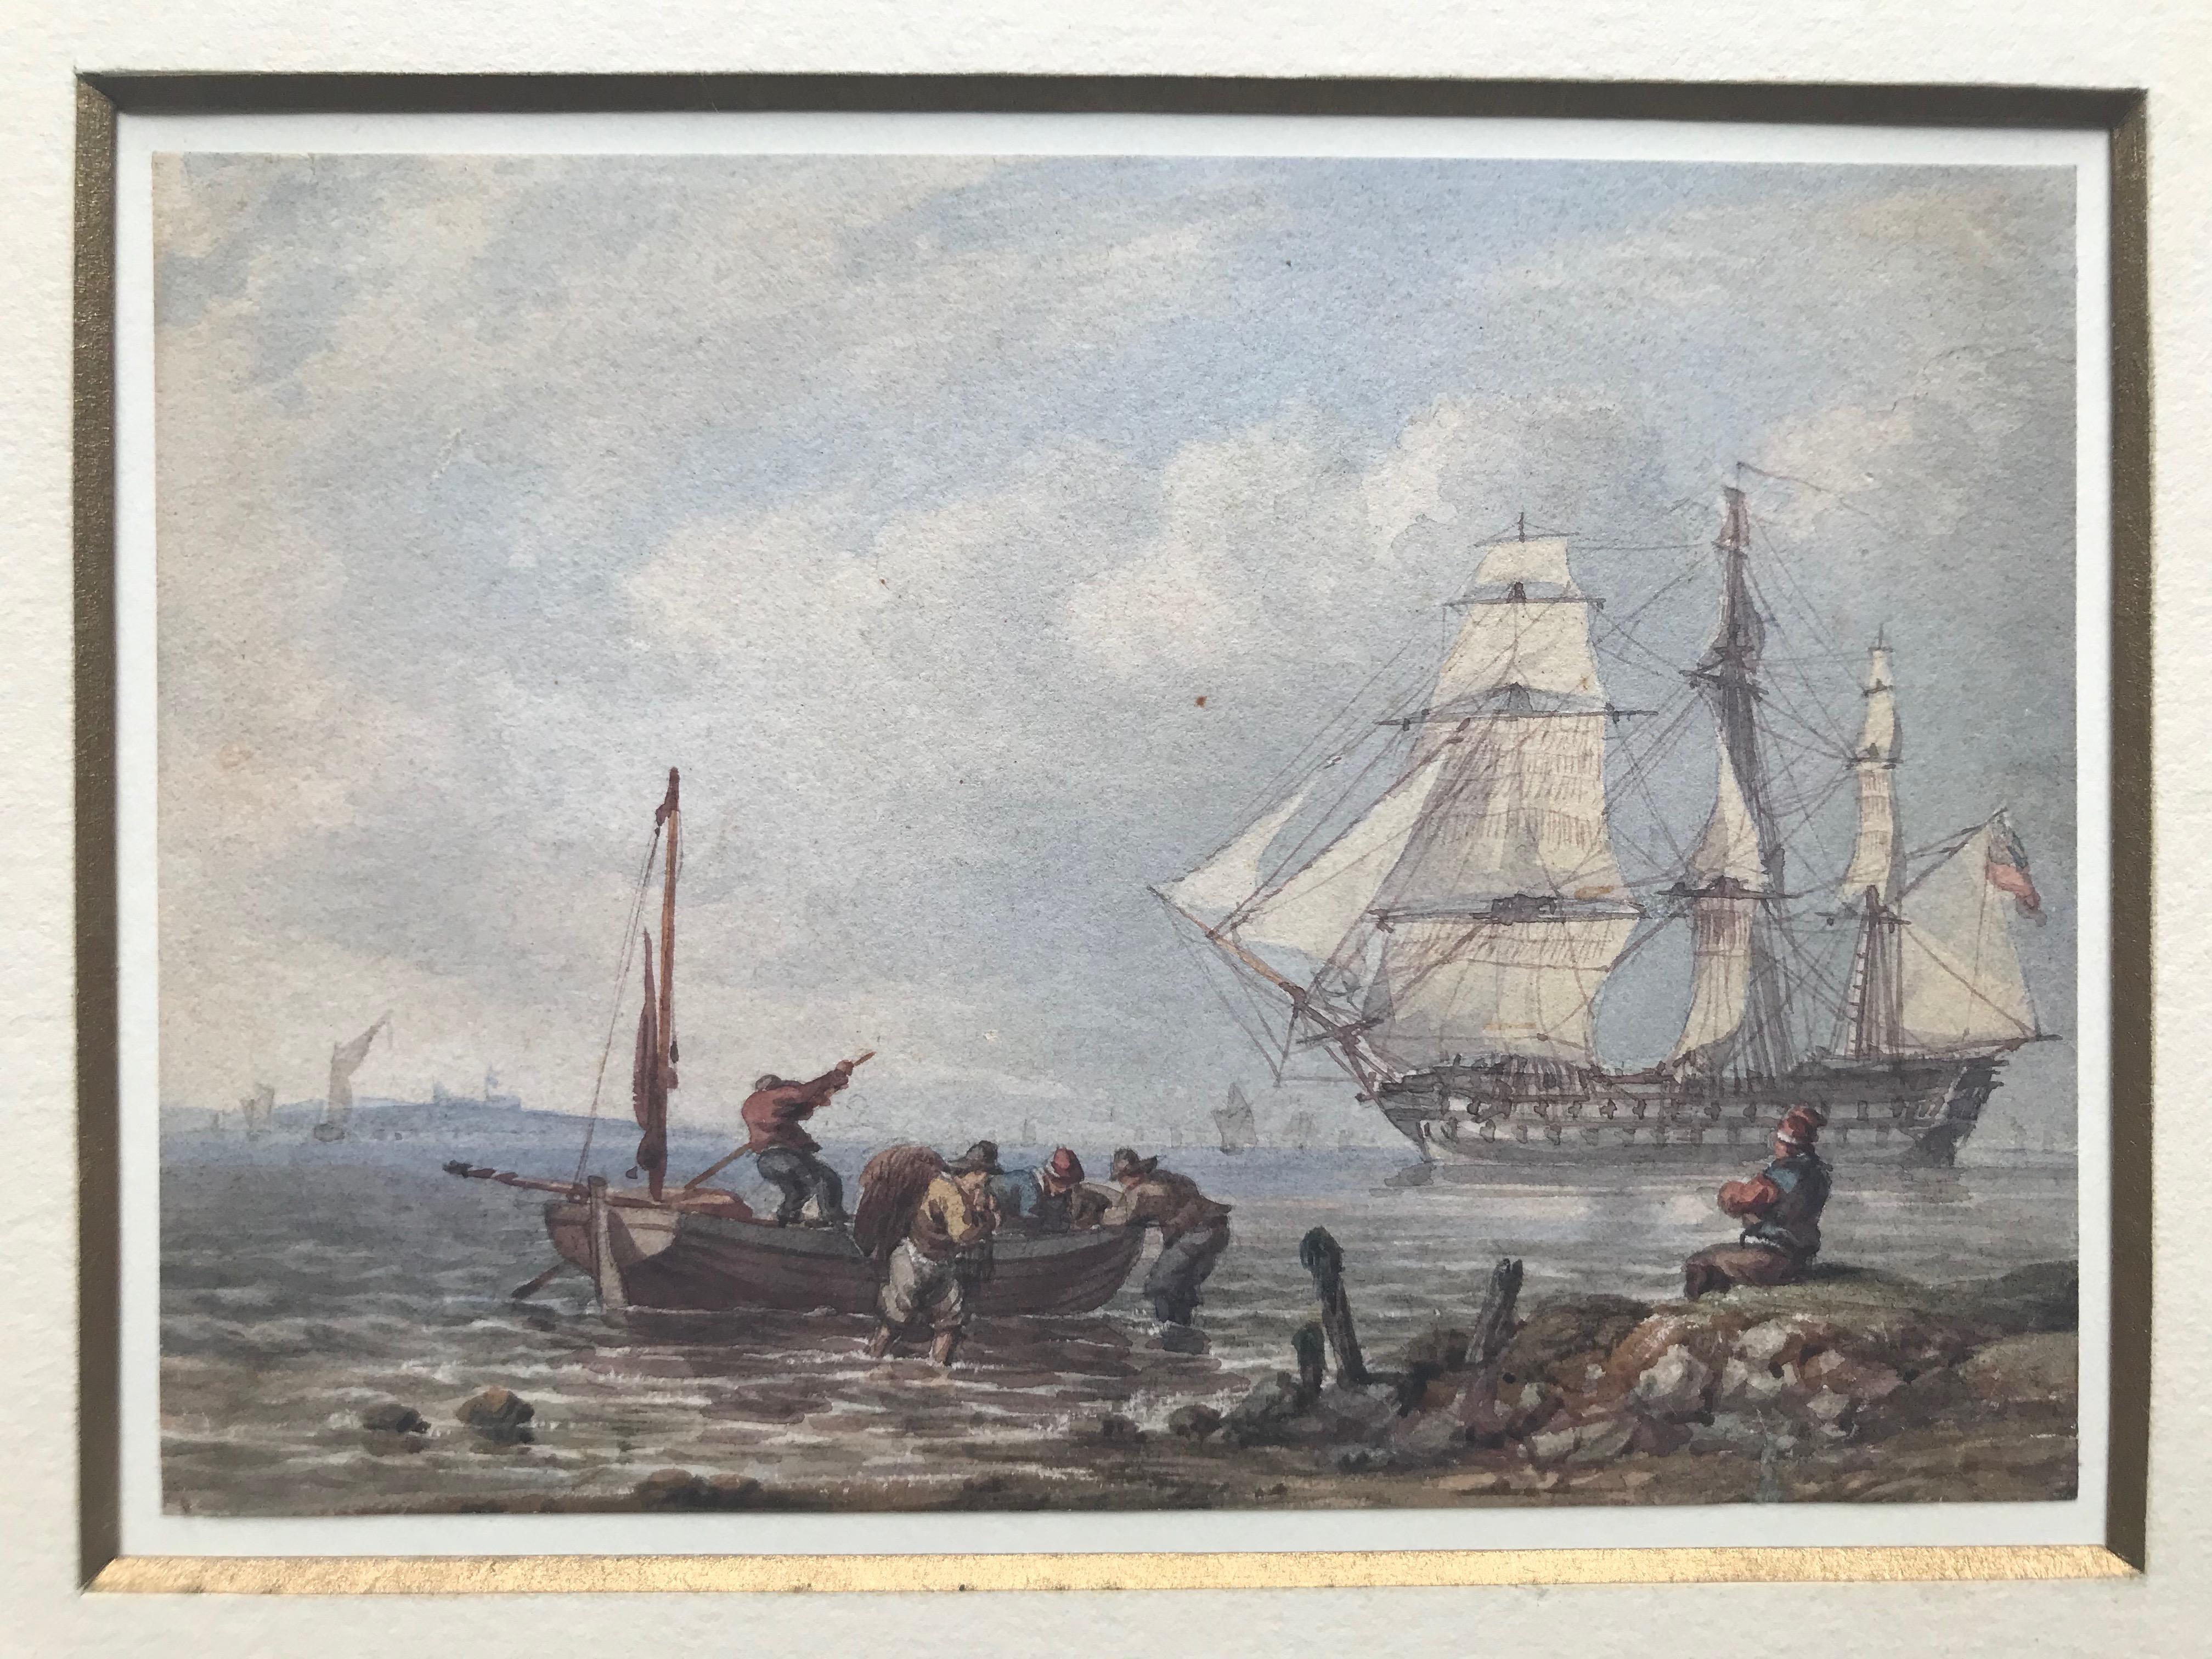 A wonderful pair of watercolours by William Joy (1803-1867)

A Man o'war and other shipping in choppy seas; A Man o'war and other shipping in calm waters
Watercolour over traces of pencil
Both 4 x 5½ inches 
10 x 11½ inches with frames

William Joy